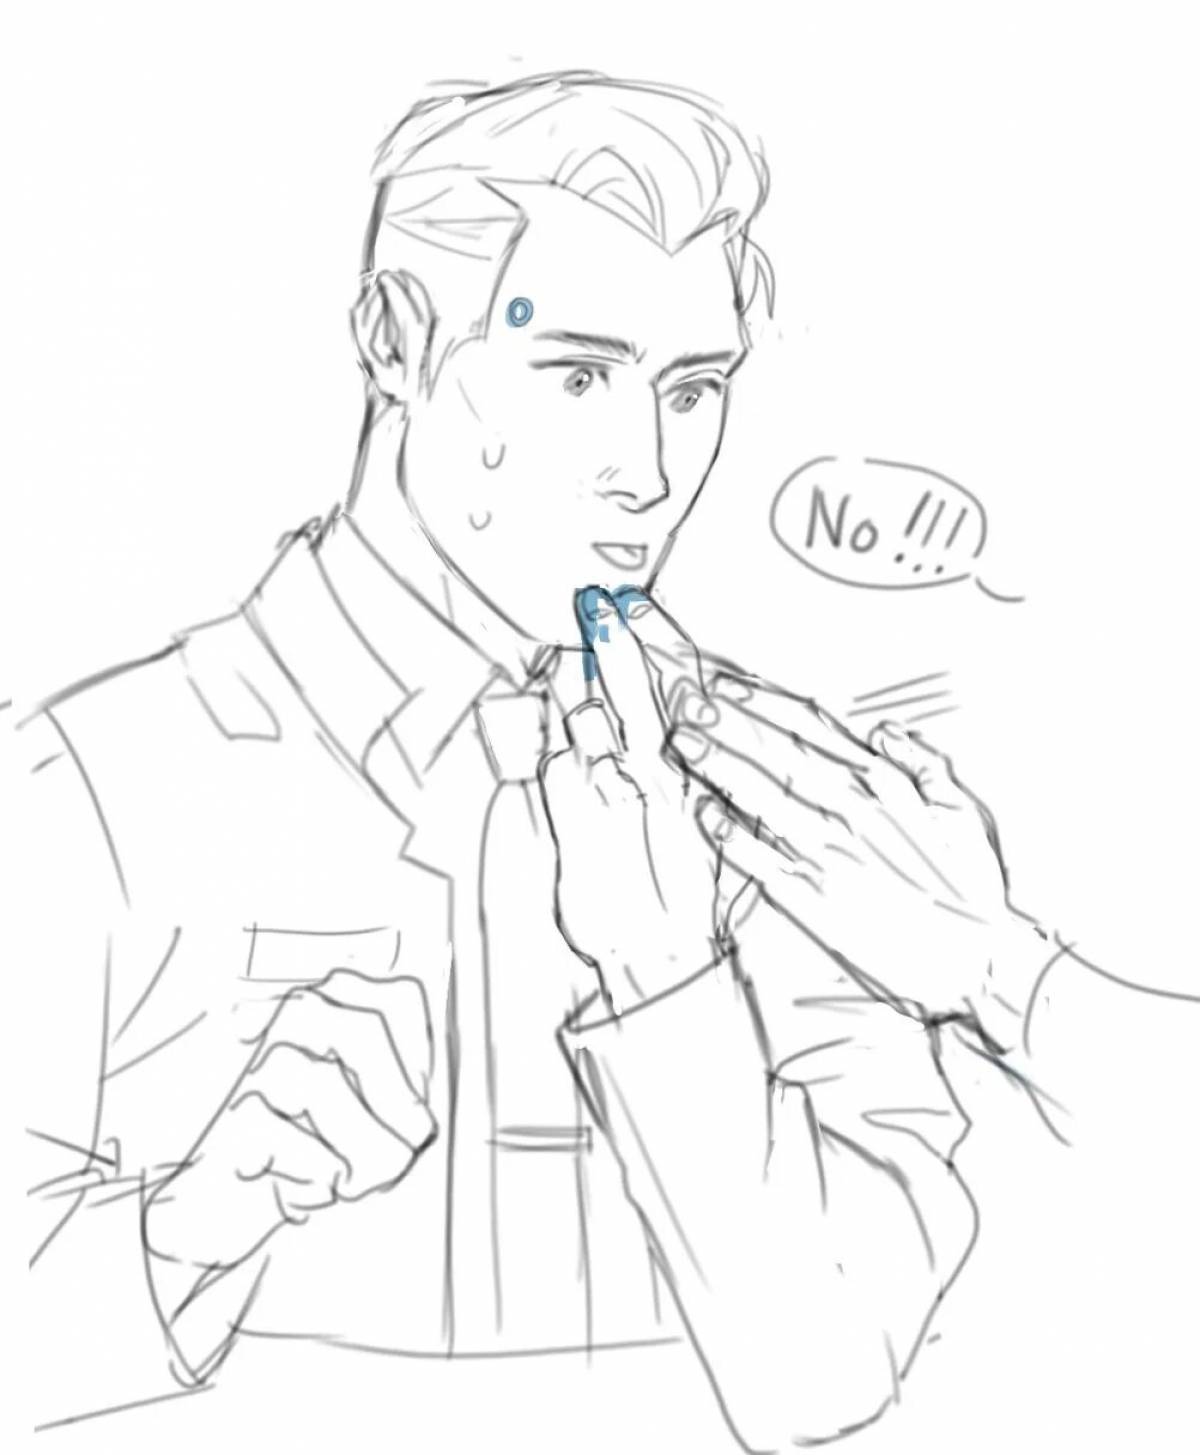 Exciting detroit become human coloring book